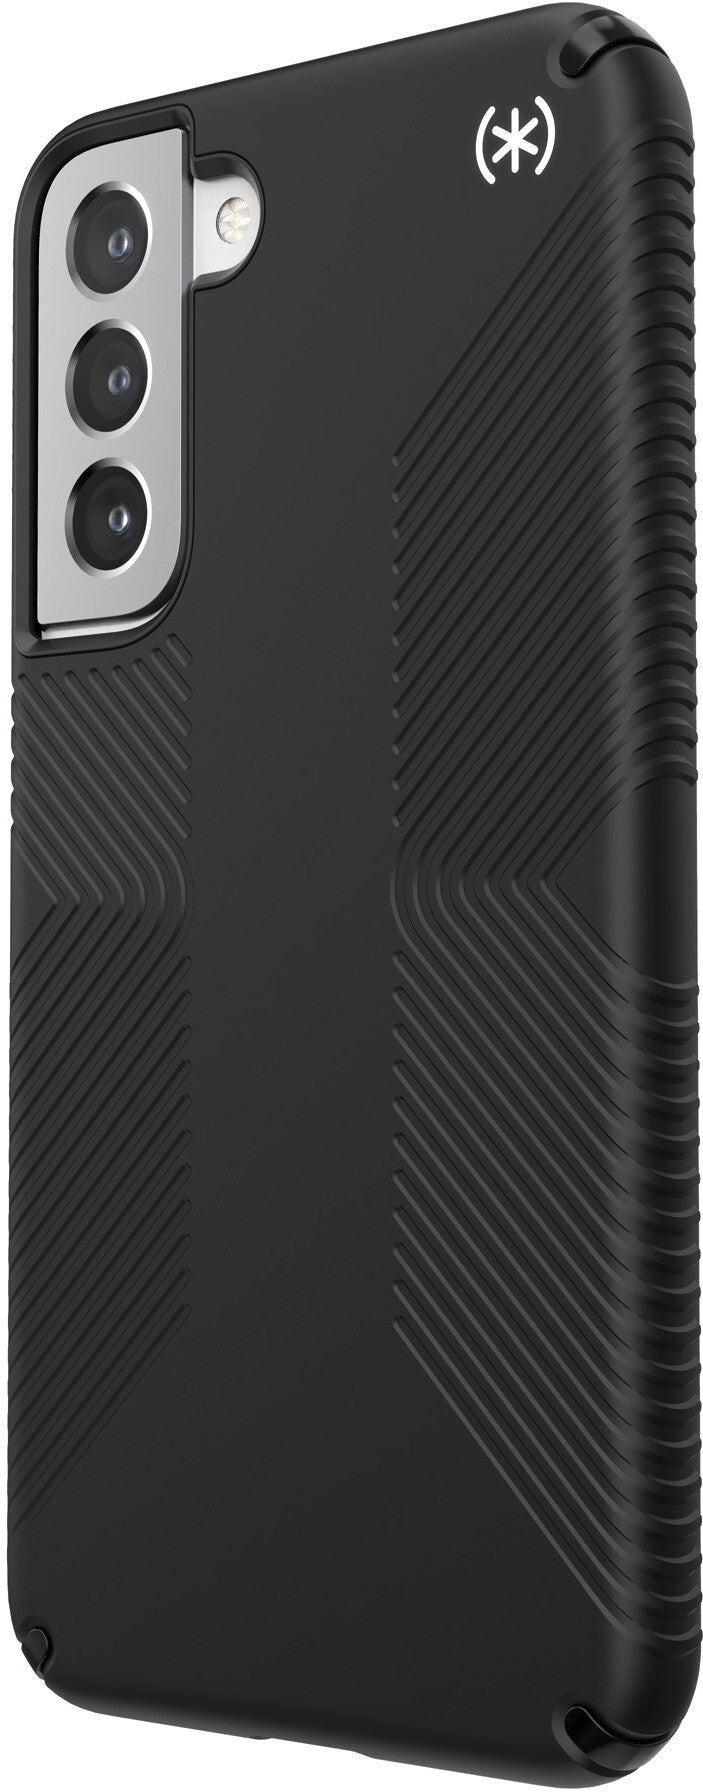 Speck Presidio2 mobile phone grip case with Microban for Galaxy S22 Plus in Black